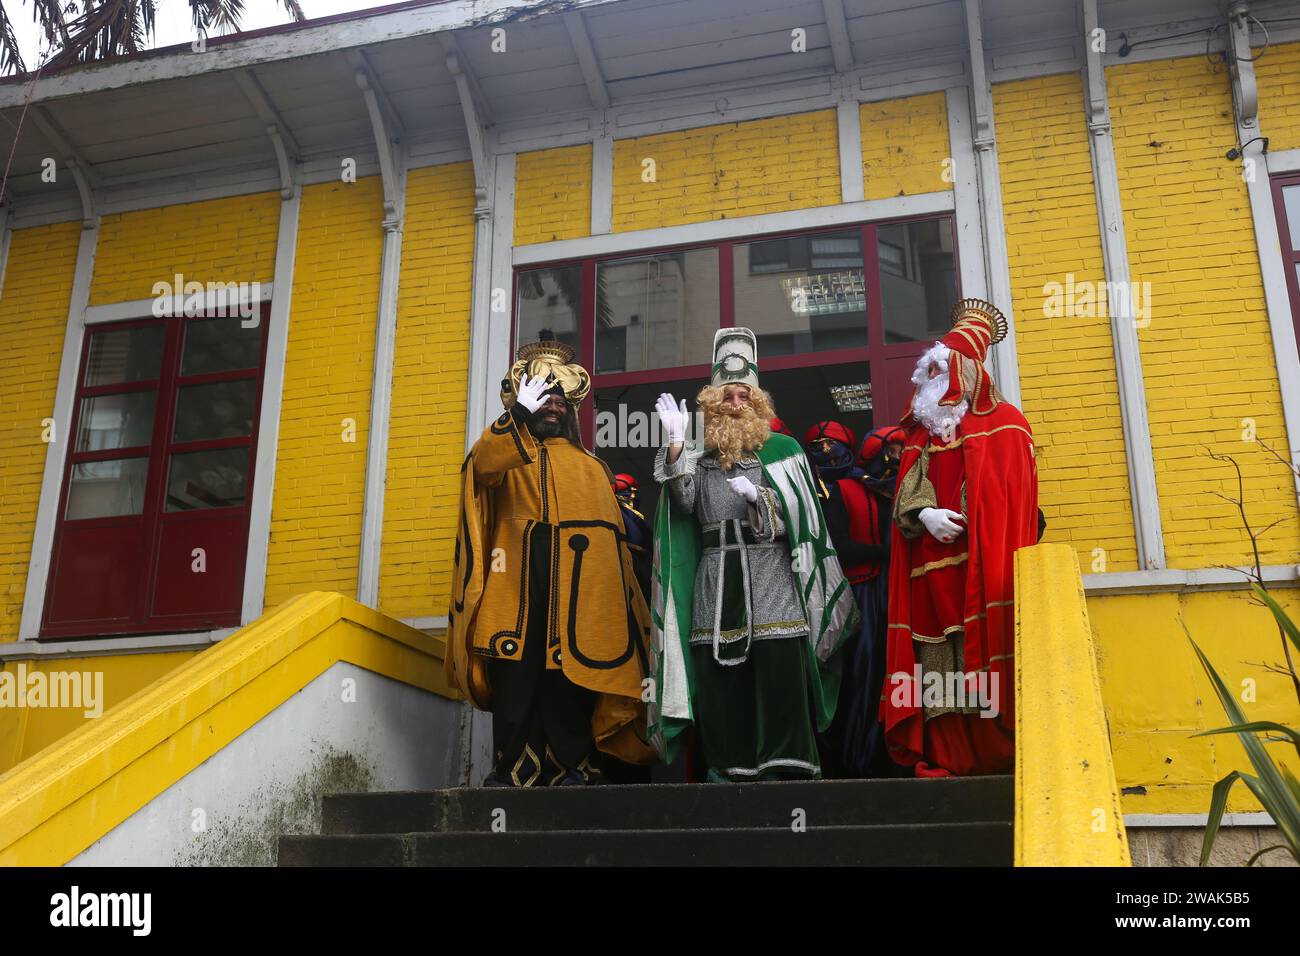 Noreña, Spain, January 05th, 2024: The Three Wise Men greet the children who were waiting for their arrival during the arrival of HM The Three Wise Men to Noreña, on January 05, 2024, in Noreña, Spain. Credit: Alberto Brevers / Alamy Live News. Stock Photo